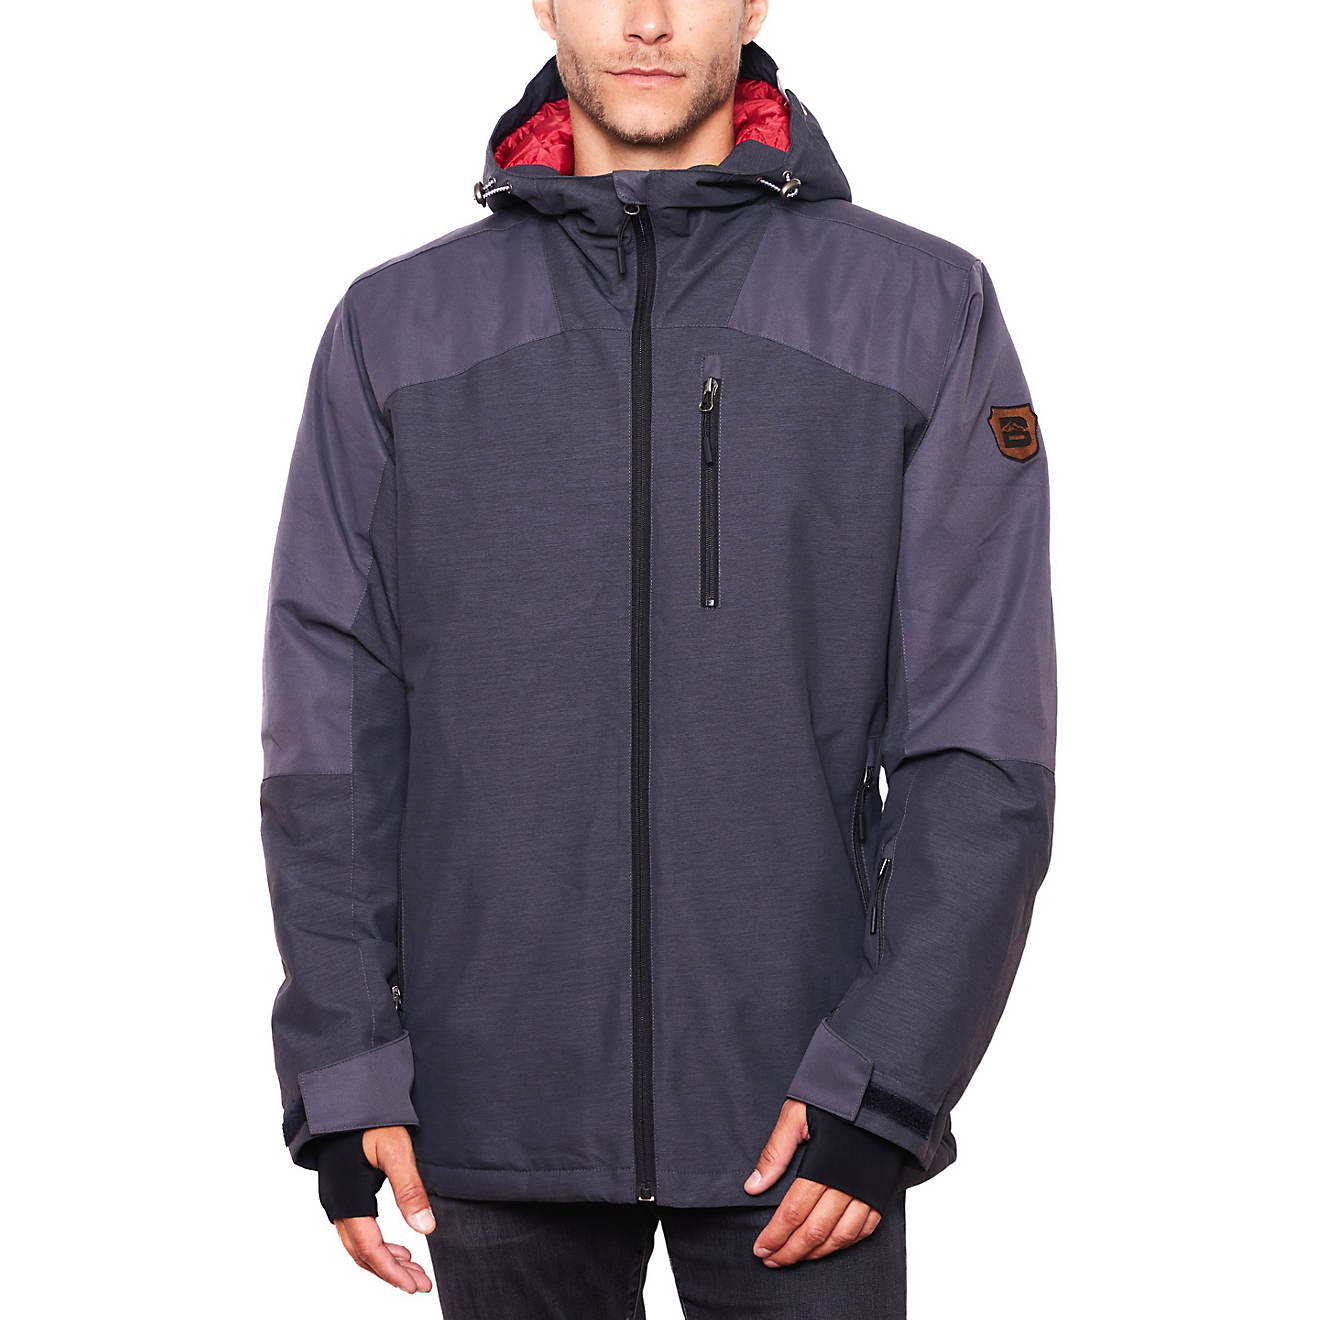 Be Boundless Men's Expedition Series Vortex Technical Performance Ski Jacket                                                     - view number 1